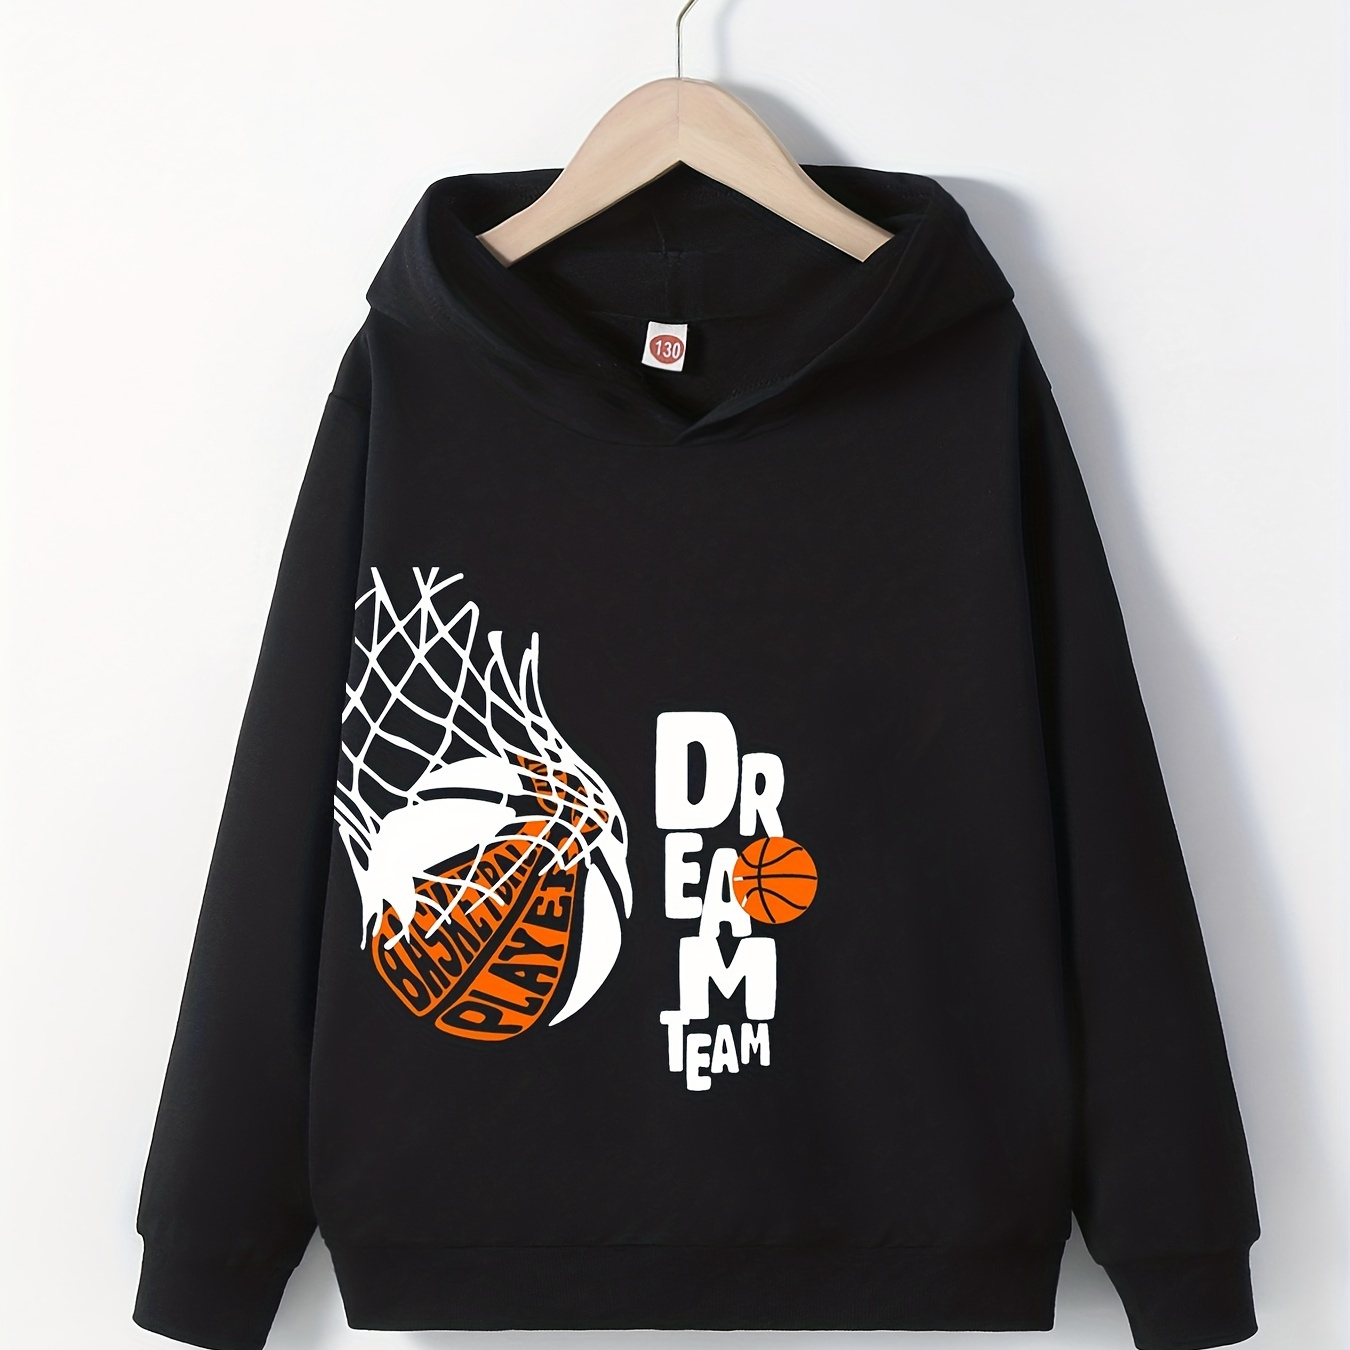 

Basketball And Dream Team Letter Print Boys Casual Pullover Long Sleeve Hoodies, Boys Sweatshirt For Spring Fall, Kids Hoodie Tops Outdoor